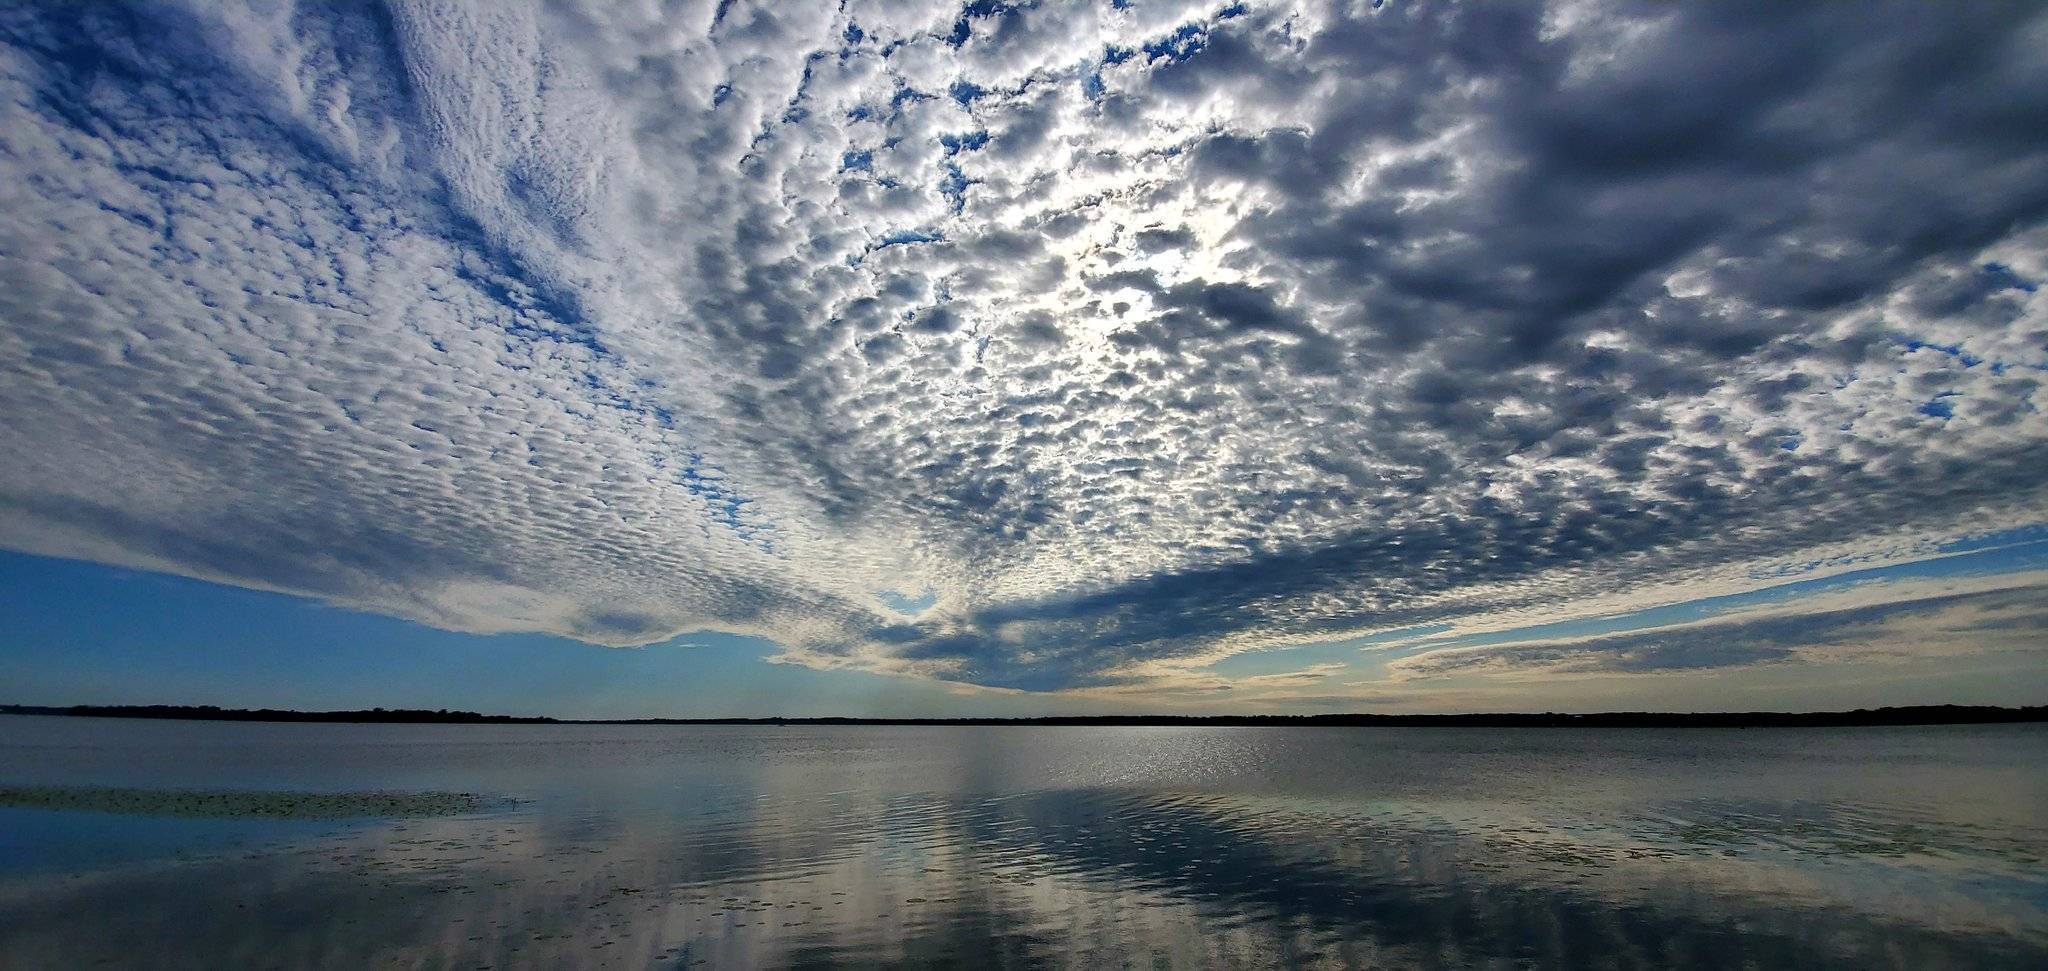 1st Place Beauty in the sky!!! Lake Scugog, ON by Debby Lieto @DebDeb0223